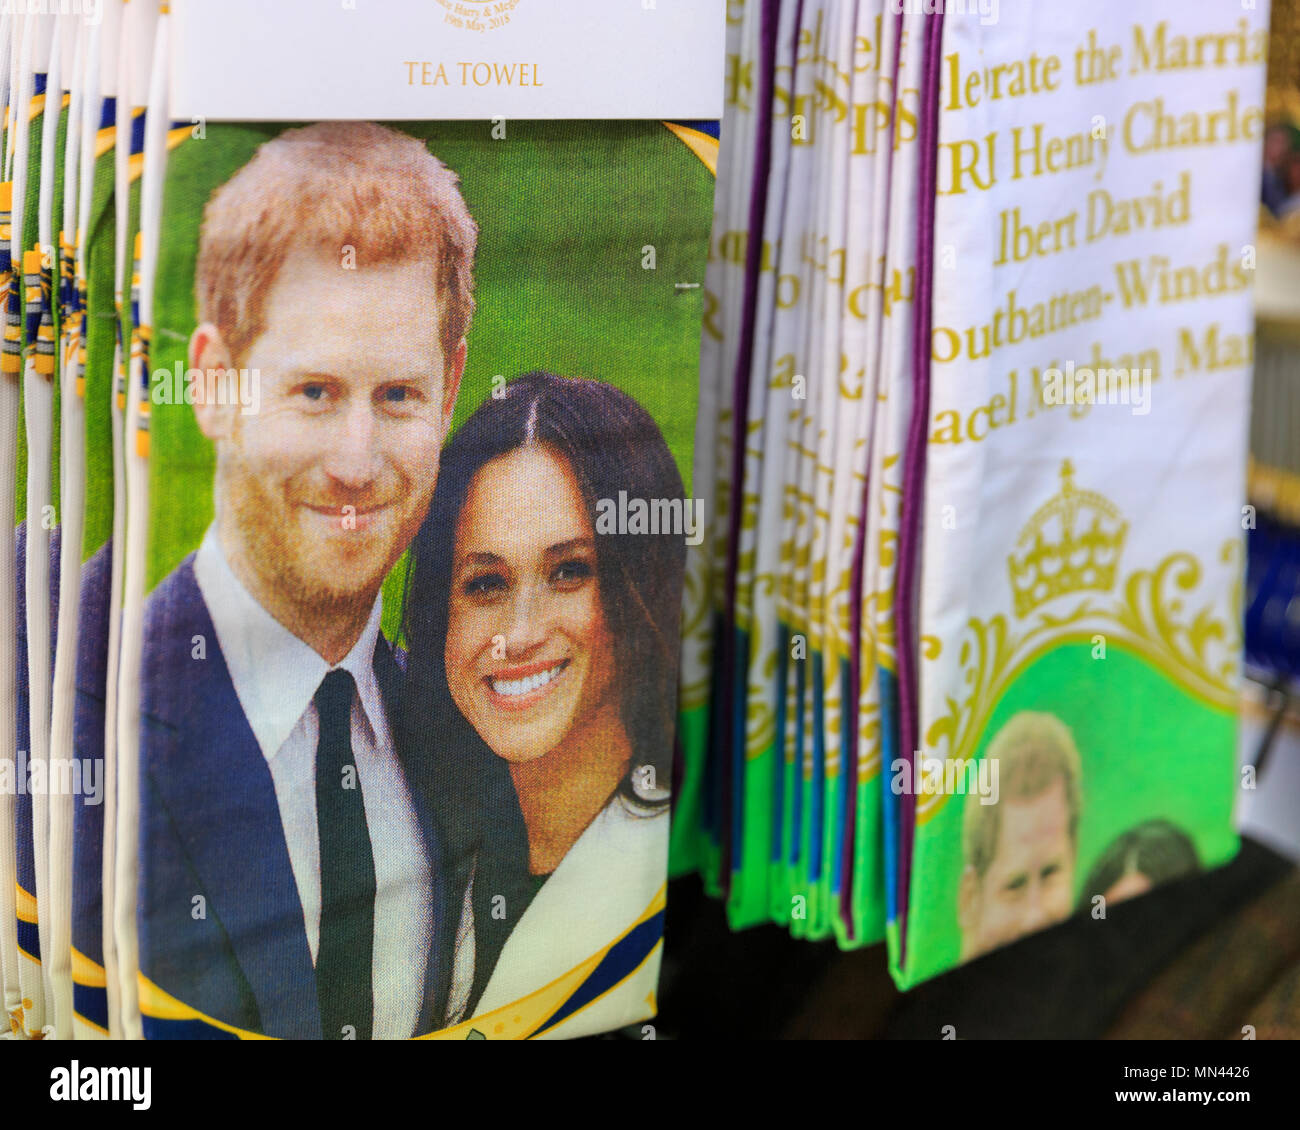 Central London, 14th May 2018. Who's doing the dishes? Harry & Meghan tea towels. Union Jack flags, decorations, gift mugs, bunting, commemorative plates and all kinds of Royal Wedding memorabilia and merchandise are on display as London gets ready for the Royal Wedding between Prince Harry and Meghan Markle on Saturday in Windsor. Credit: Imageplotter News and Sports/Alamy Live News Stock Photo